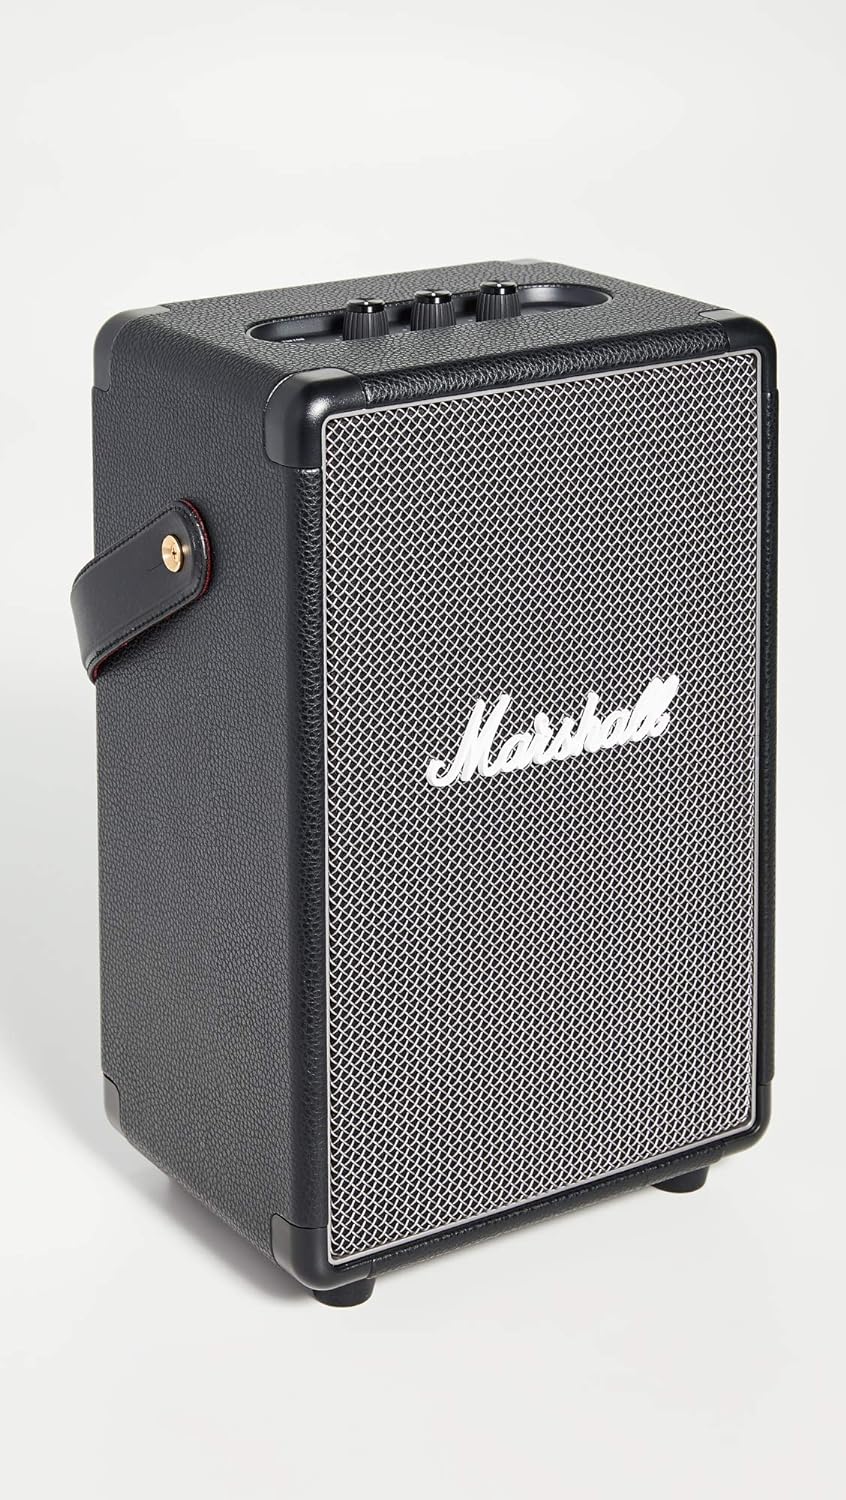 Marshall Tufton Speaker: IPX2 water-resistant rating, rugged design with metal grille. Multi-host functionality. 7340055362337